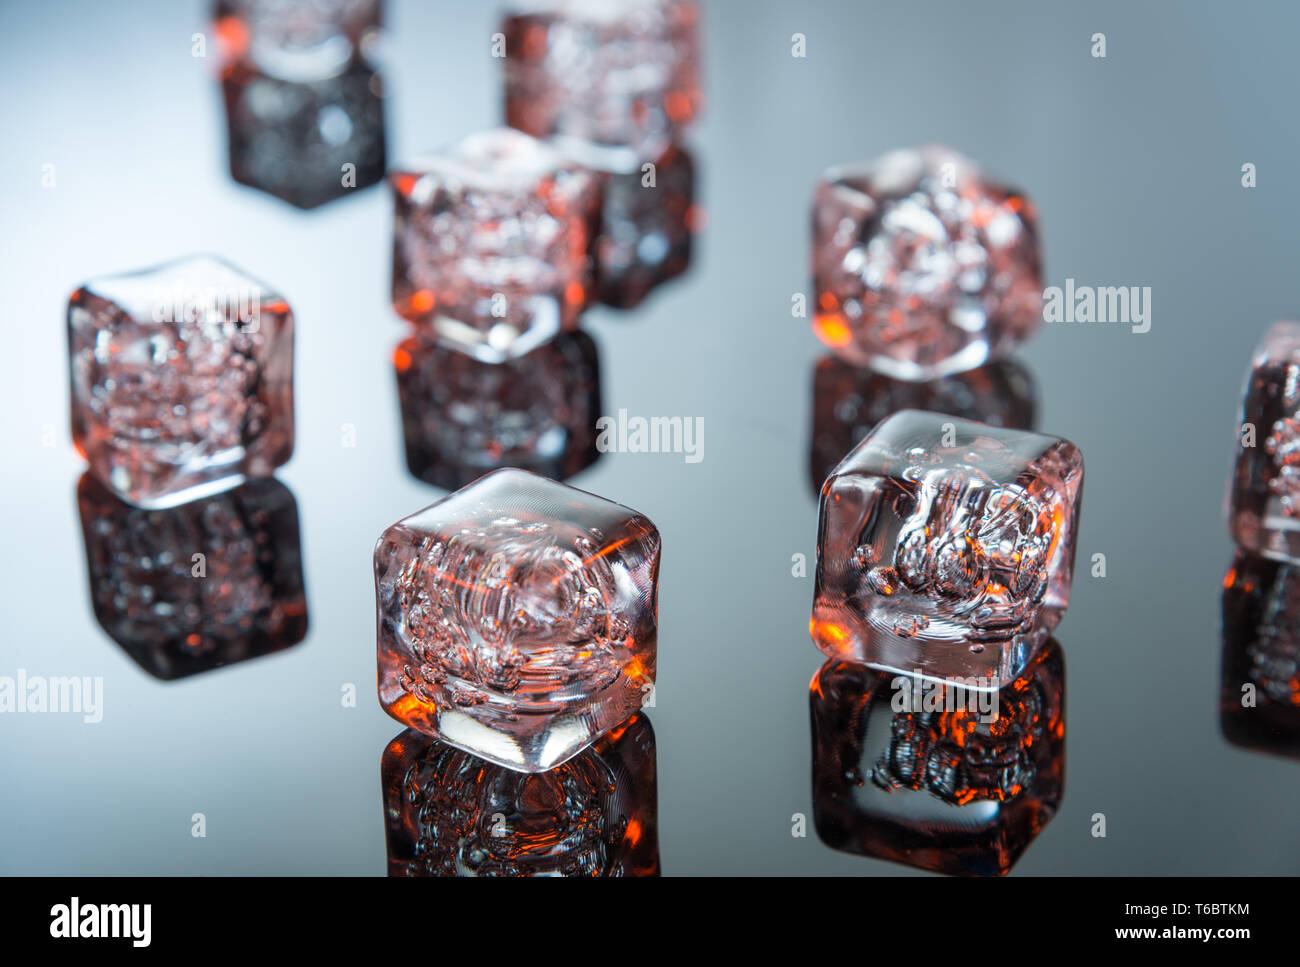 Glowing ice cubes on reflective surface Stock Photo